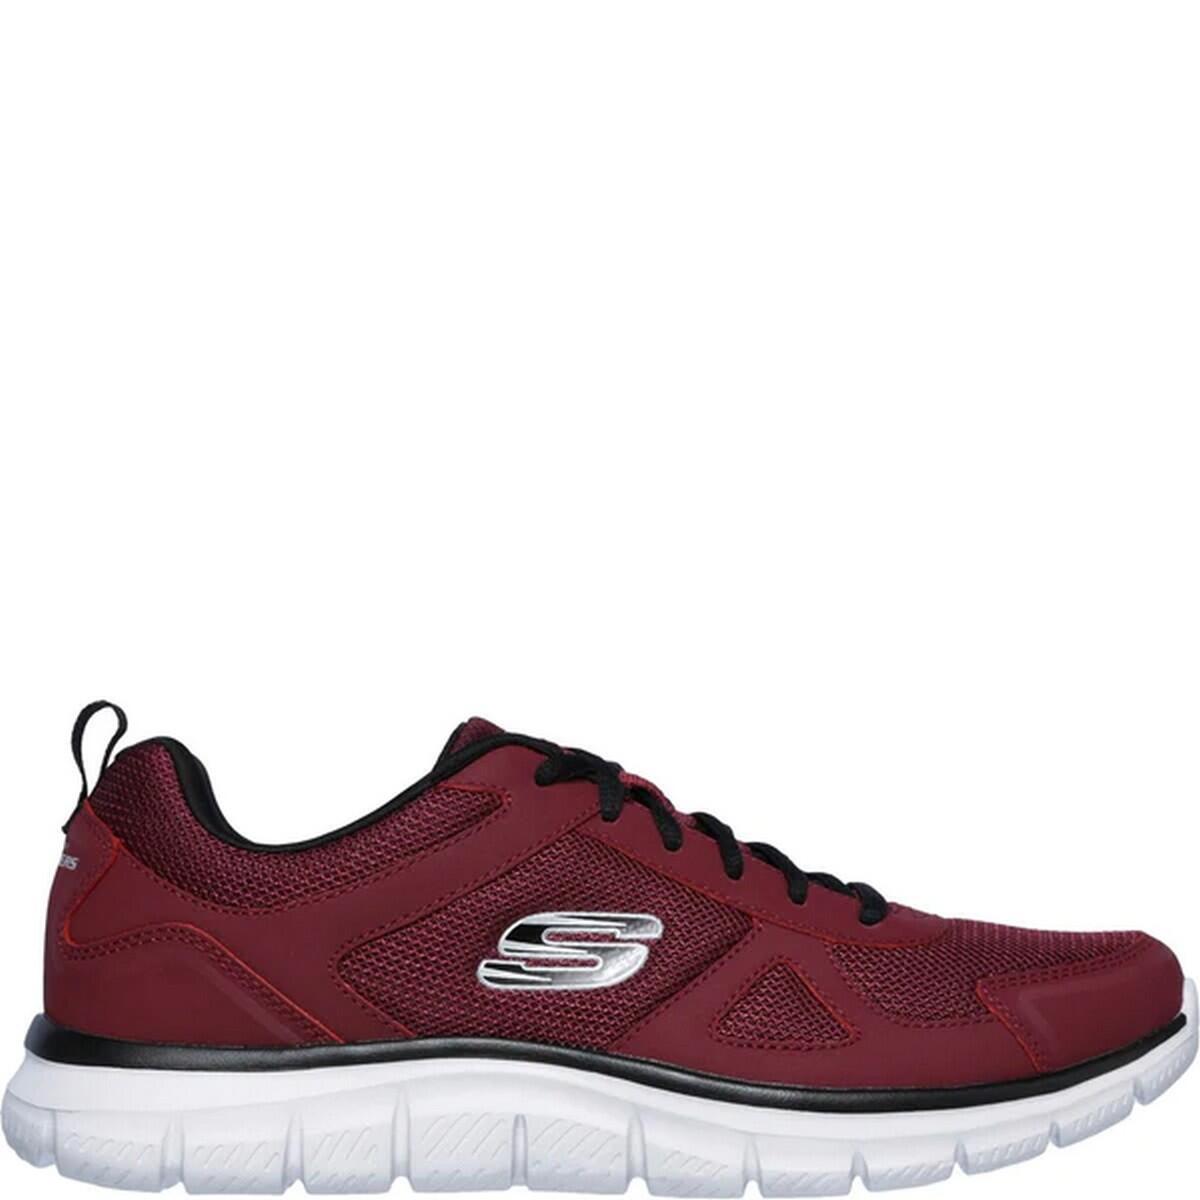 Mens Track Scloric Leather Trainers (Burgundy/Black) 3/5